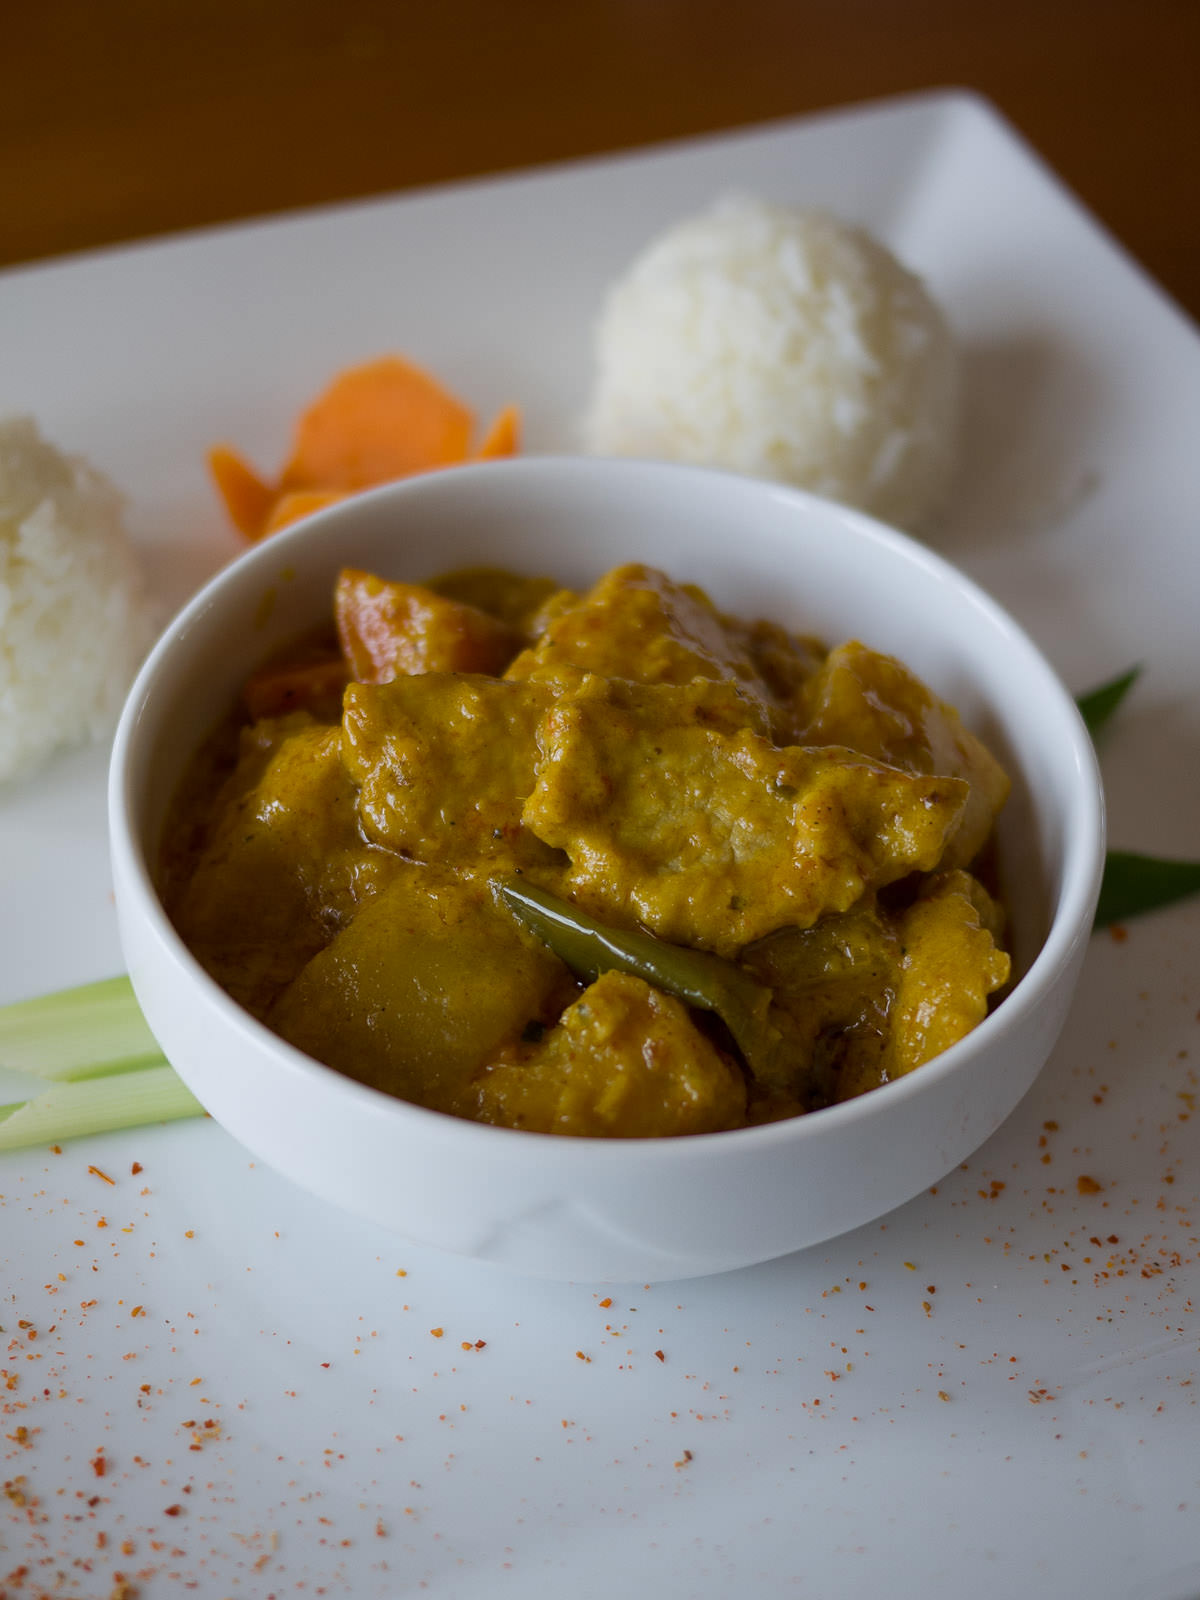 Pork curry Cambodian style with rice